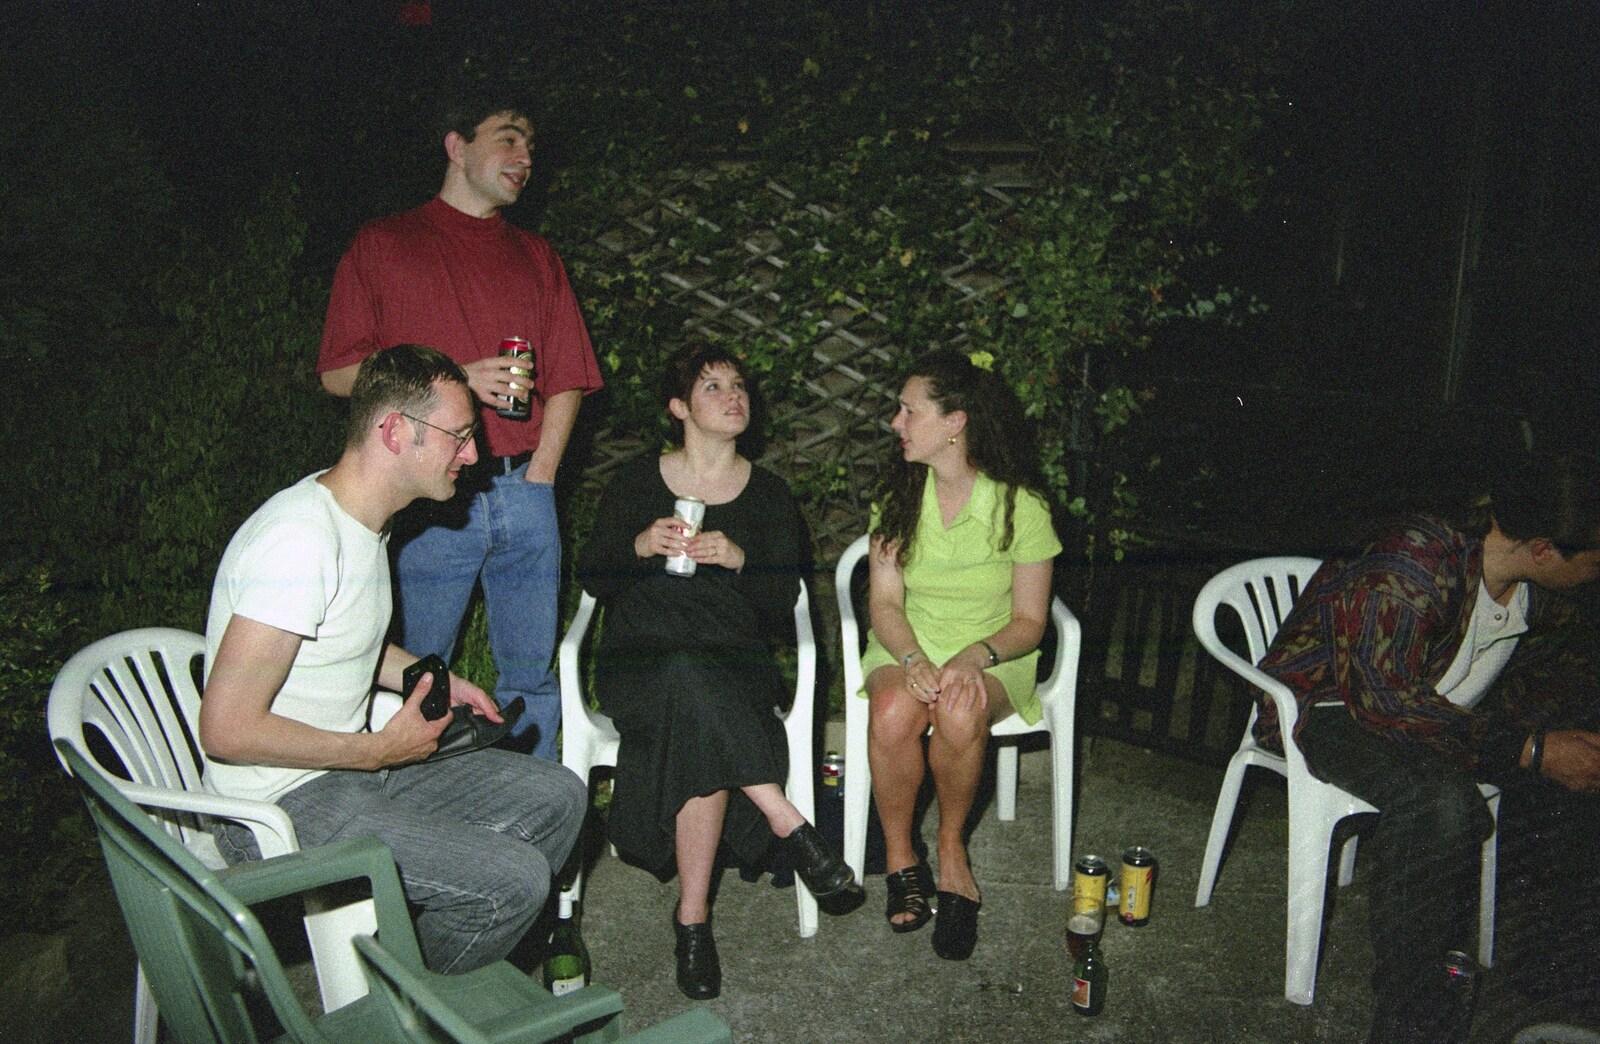 Lisa and Sarah chat from Andrew's CISU Party, and Nosher's Garden Barbeque, Ipswich and Brome, Suffolk - June 10th 1998